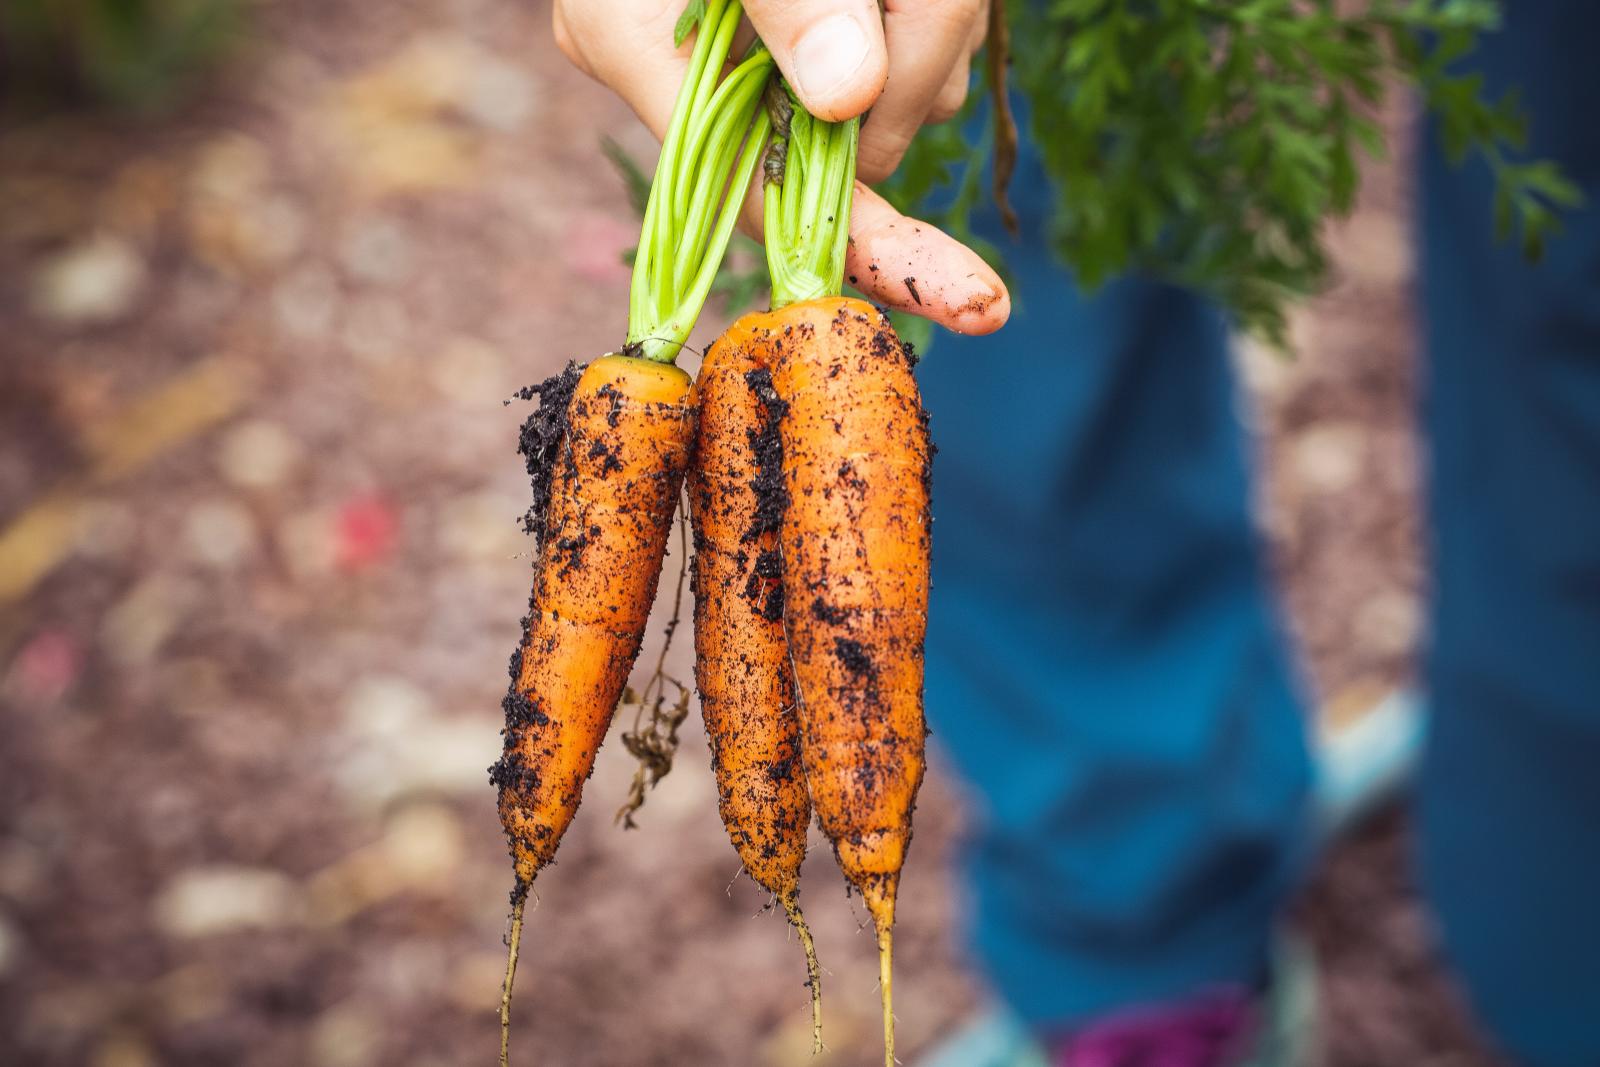 Person holding carrots. Photo credit: Pexels